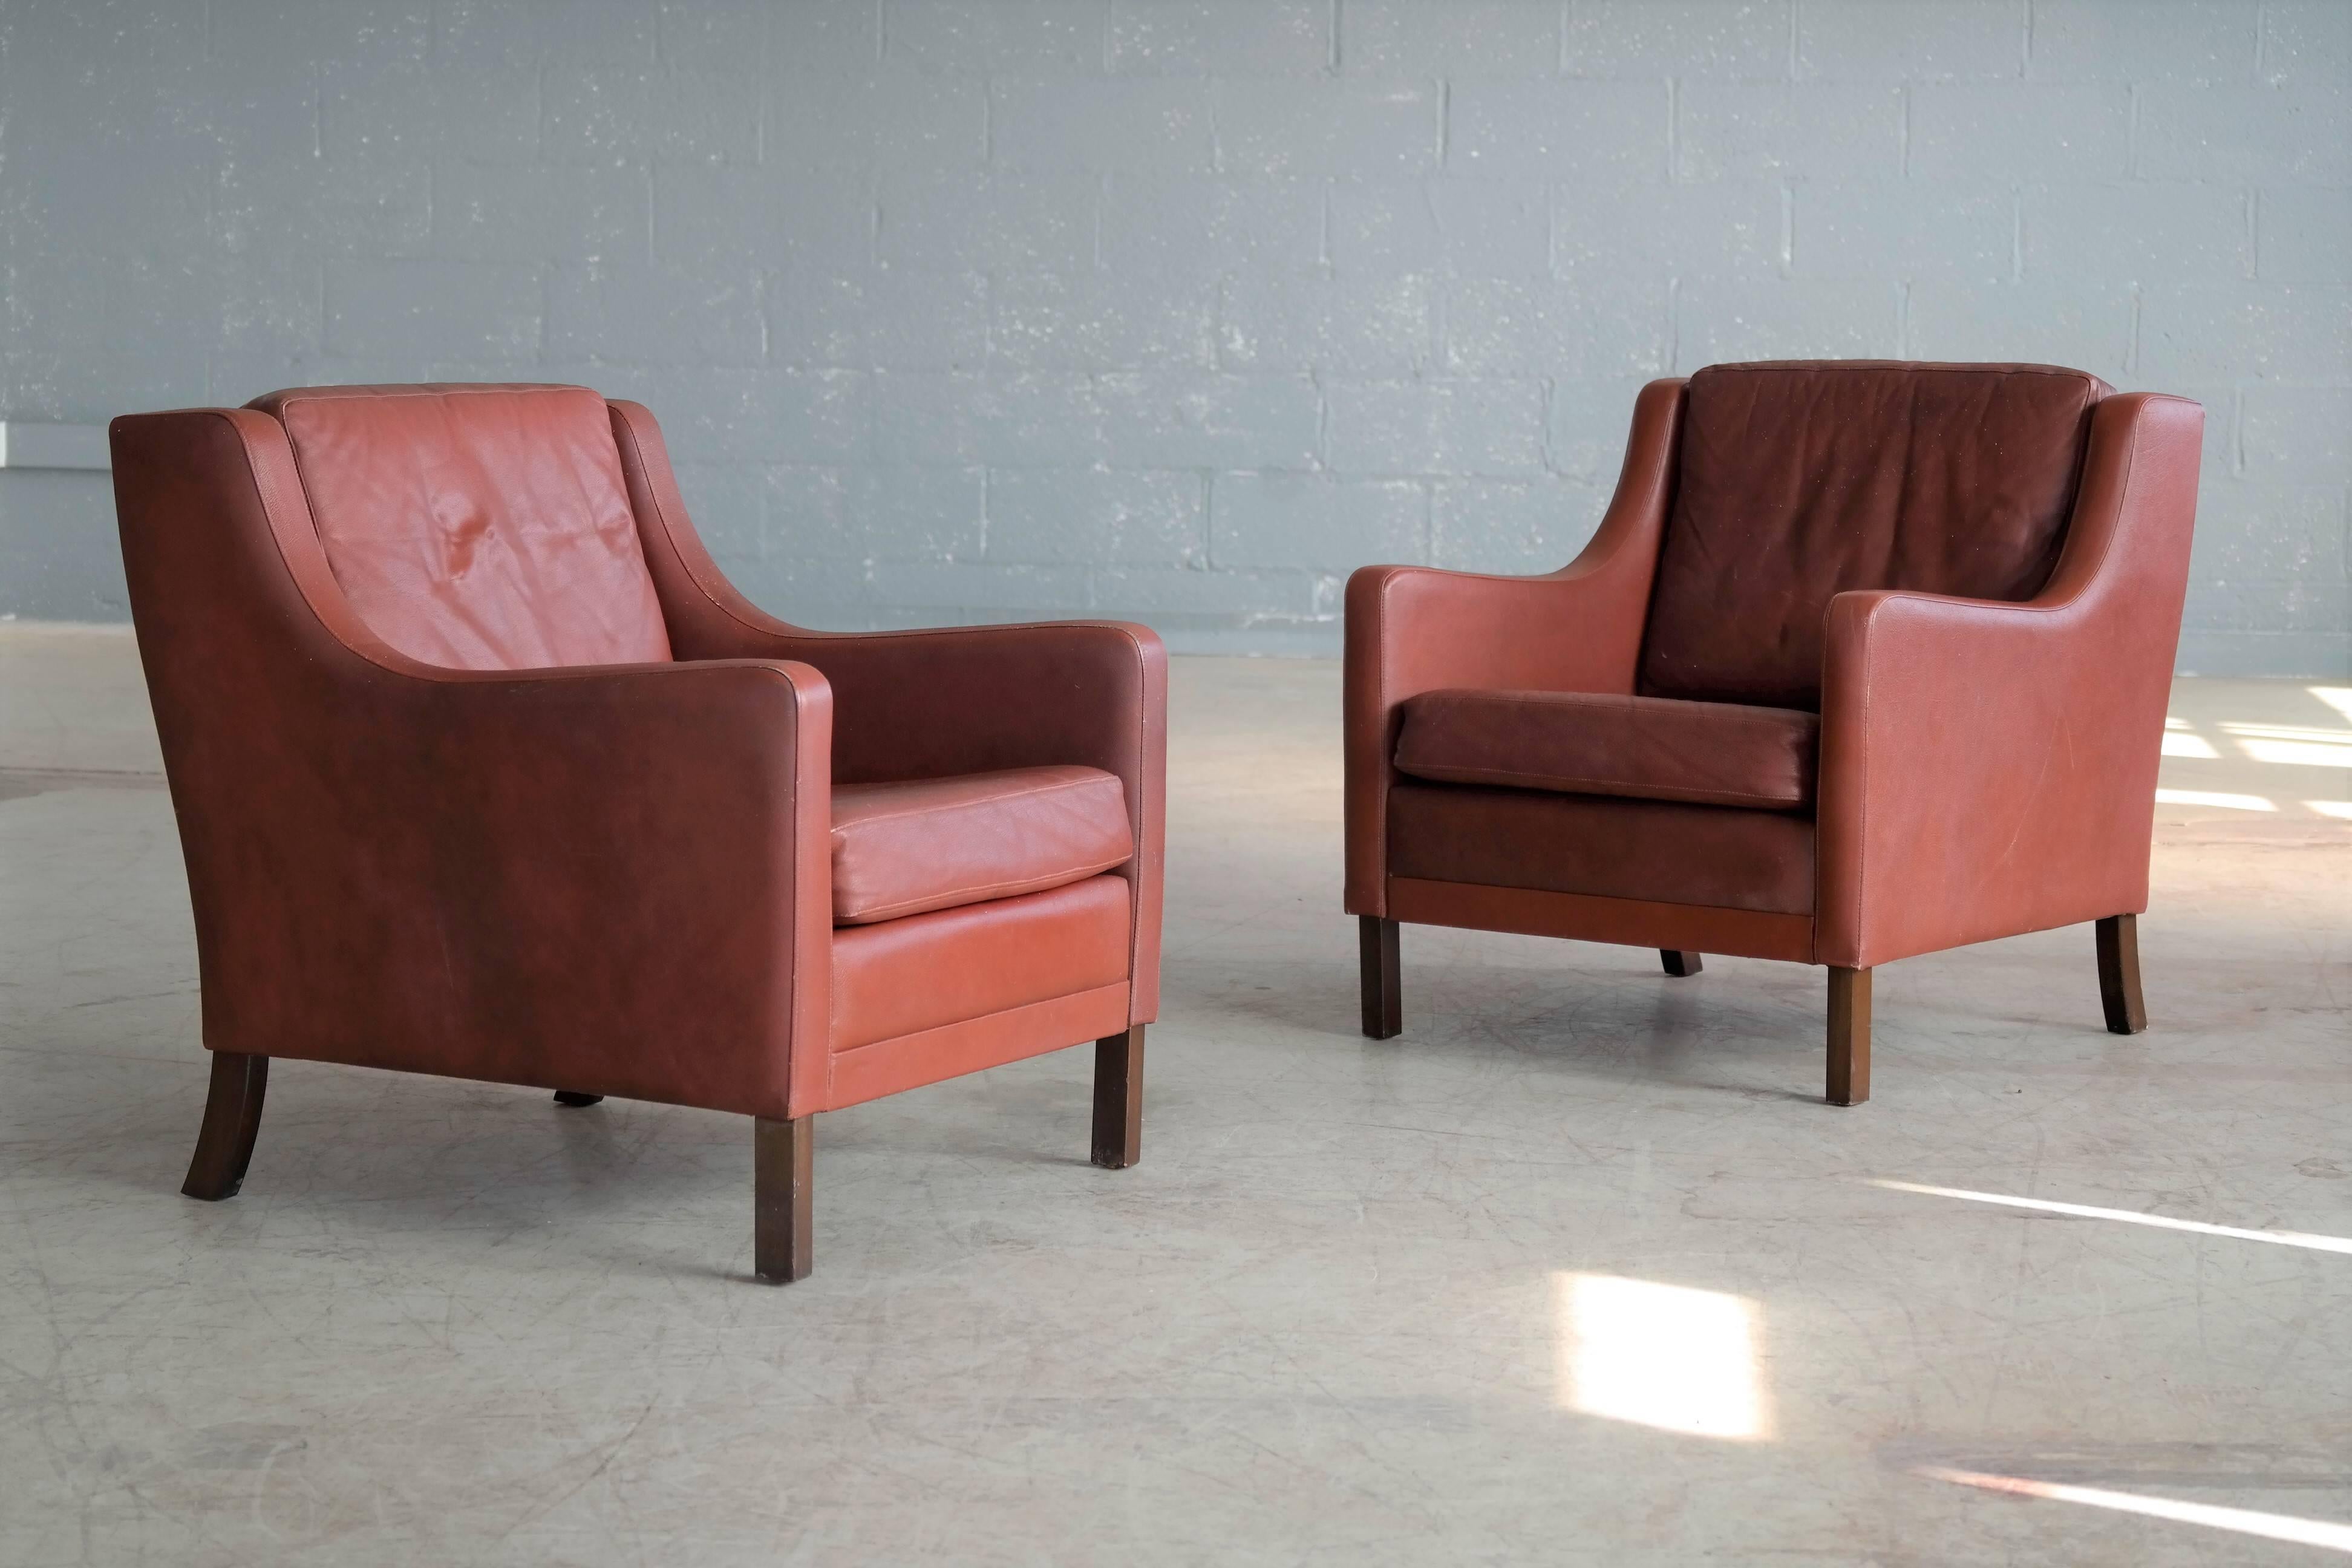 Classic Danish lounge chairs similar to Børge Mogensen’s model 2207 made by Georg Thams in reddish brown leather and stained beech wood legs. Age appropriate patina and wear. Good condition, great deal.